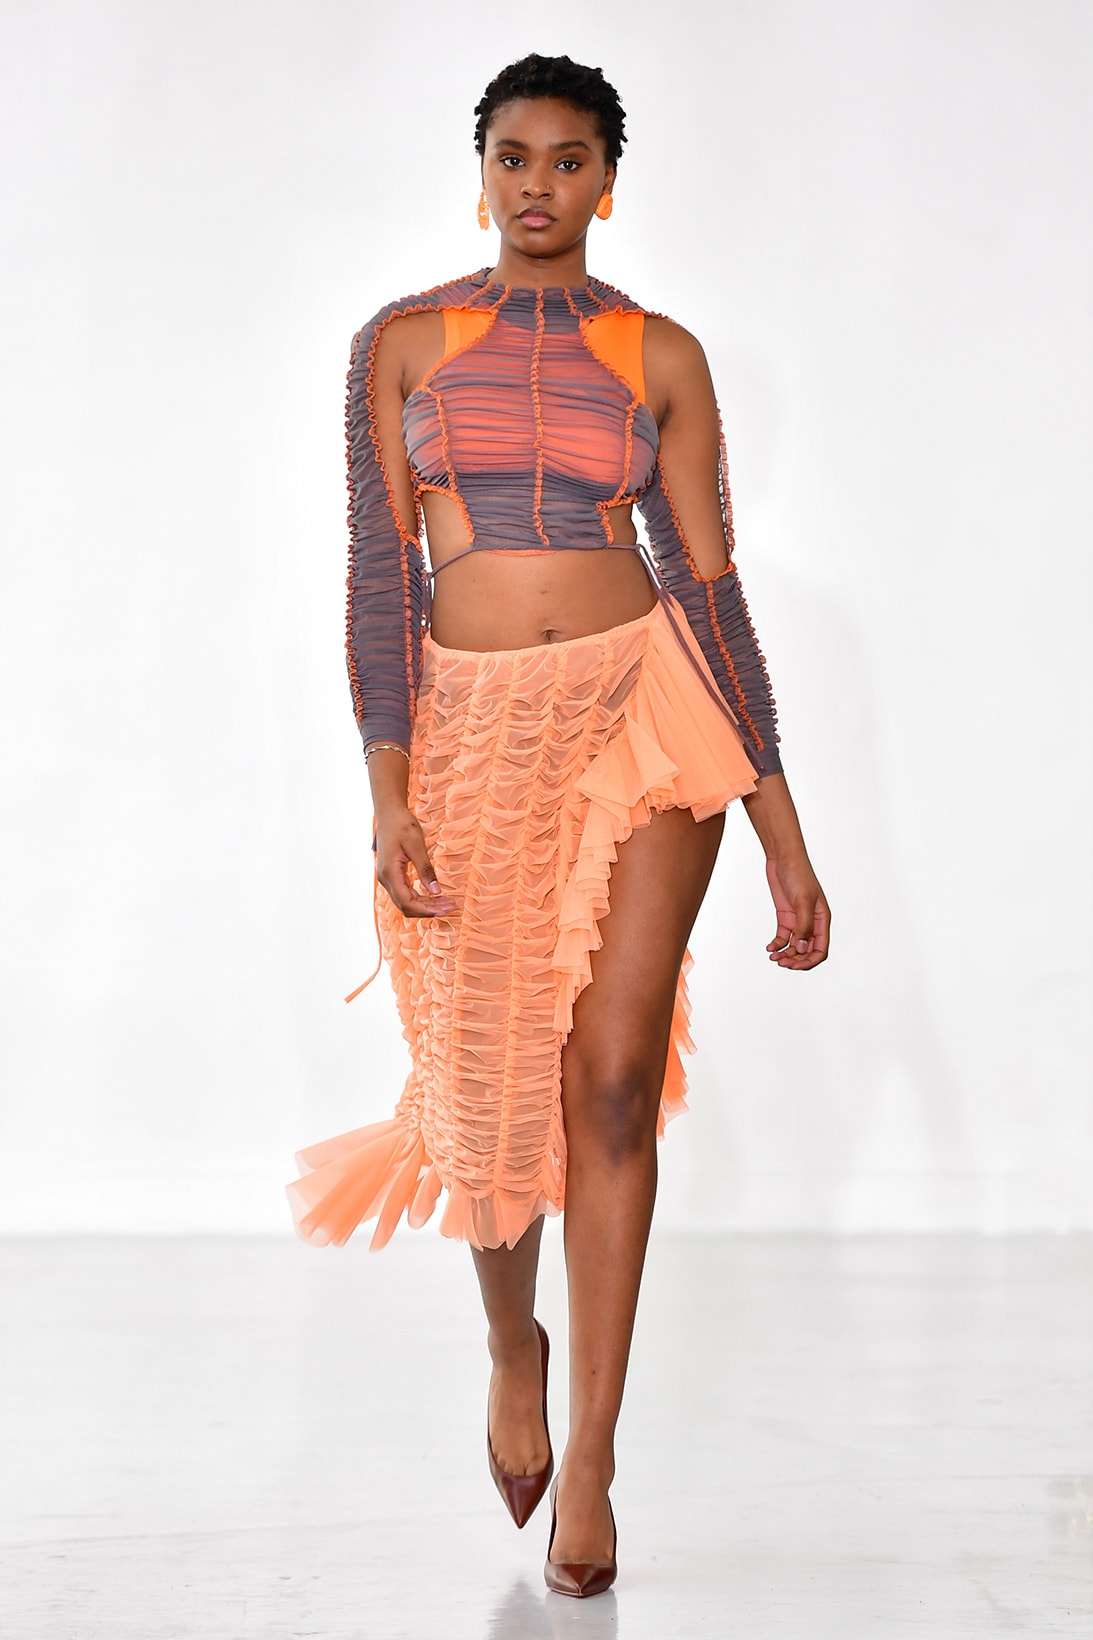 Ester Manas Fall Winter Collection Size Inclusivity Cut-Outs Fashion Week Runway Show Photos Bustier Top Skirt Gray Orange